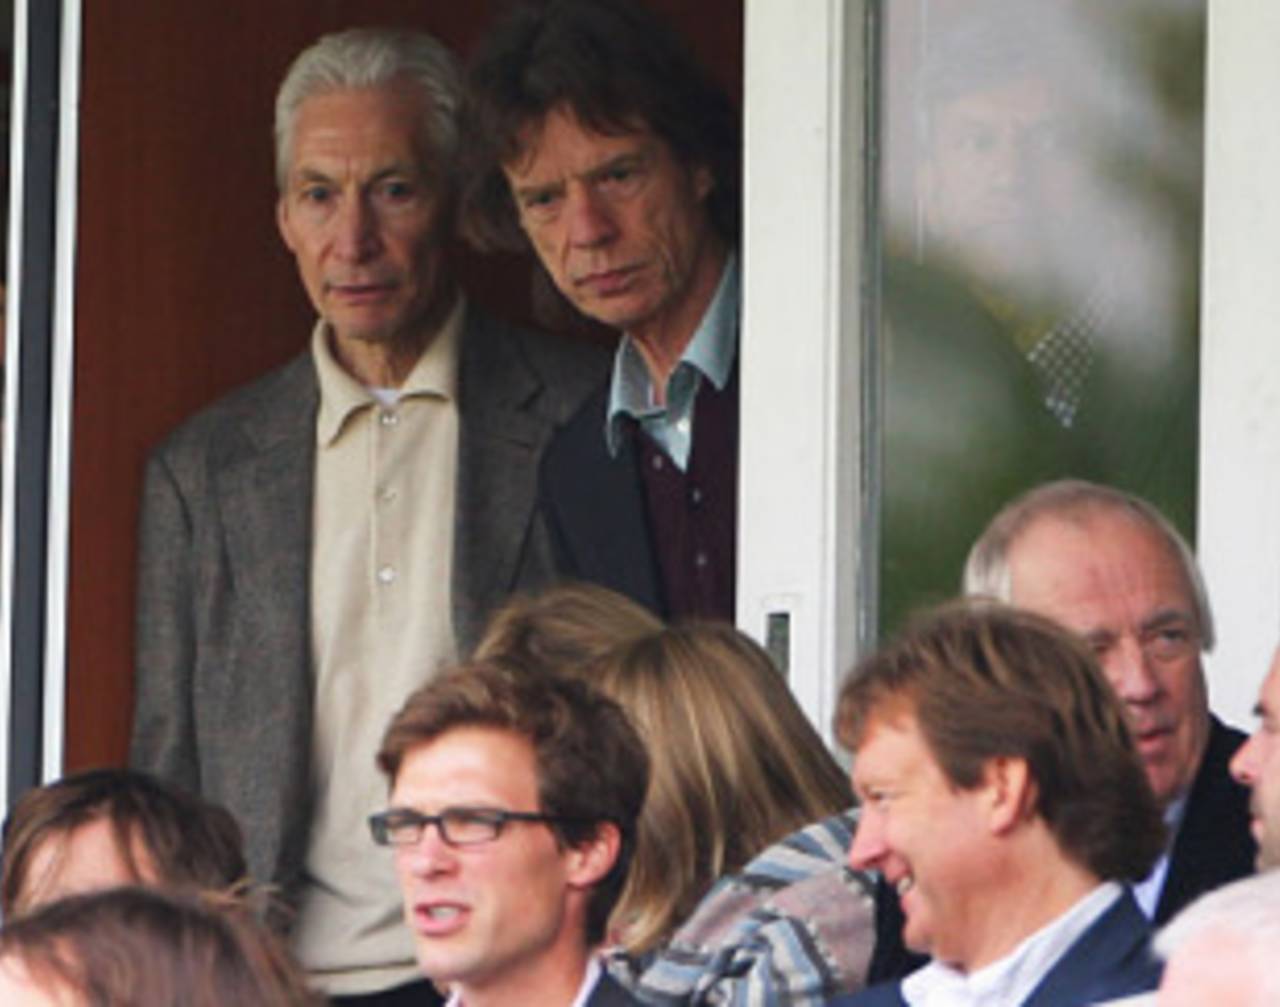 The Rolling Stones (ask granddad about them) caught in liking cricket shocker&nbsp;&nbsp;&bull;&nbsp;&nbsp;Getty Images